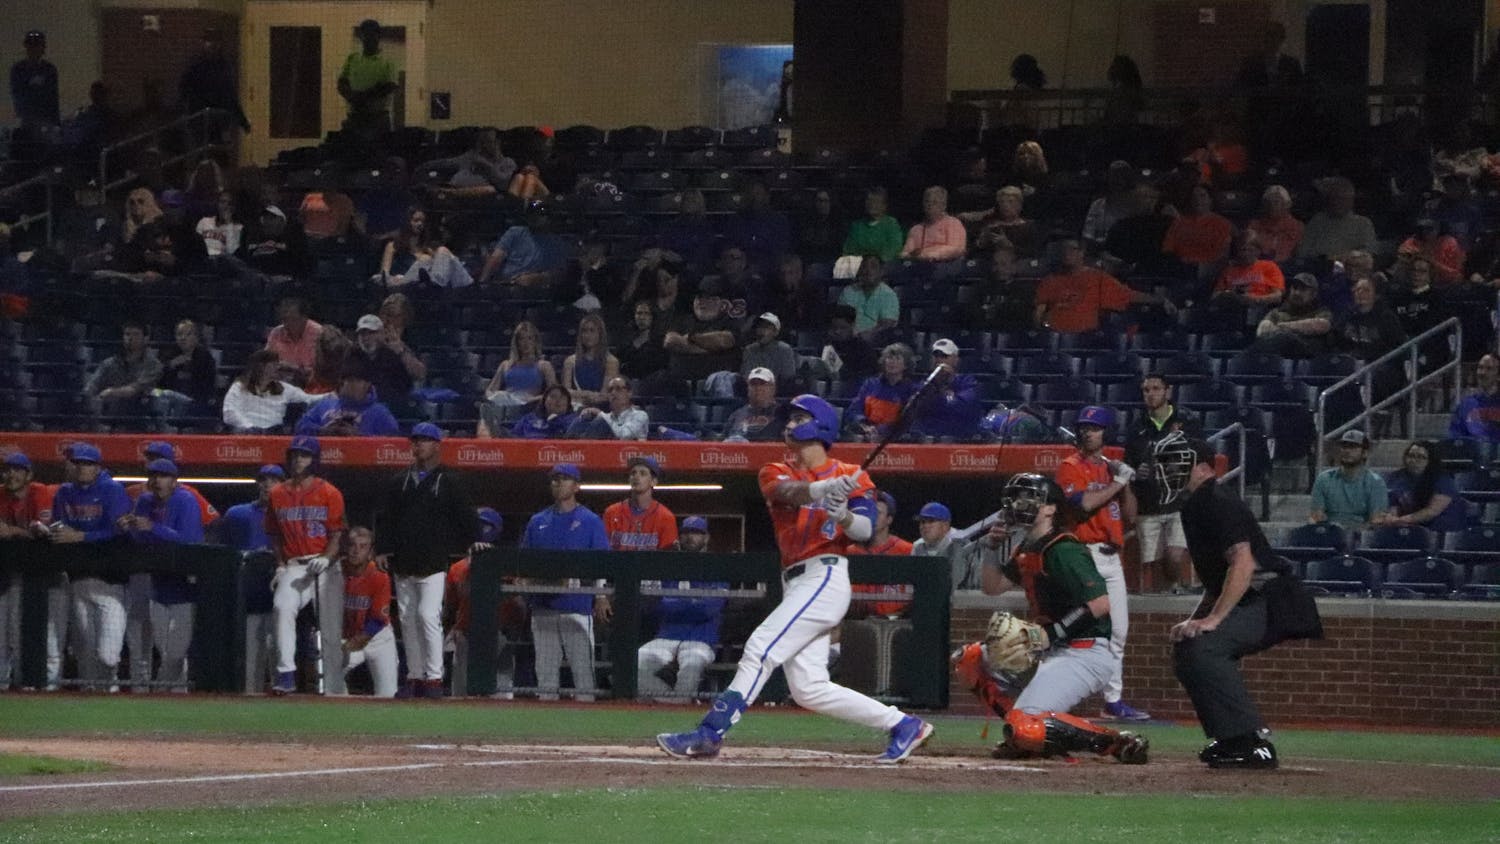 Jud Fabian nails a home run shot to center field. Florida edged Bethune-Cookman Tuesday night, 3-2.